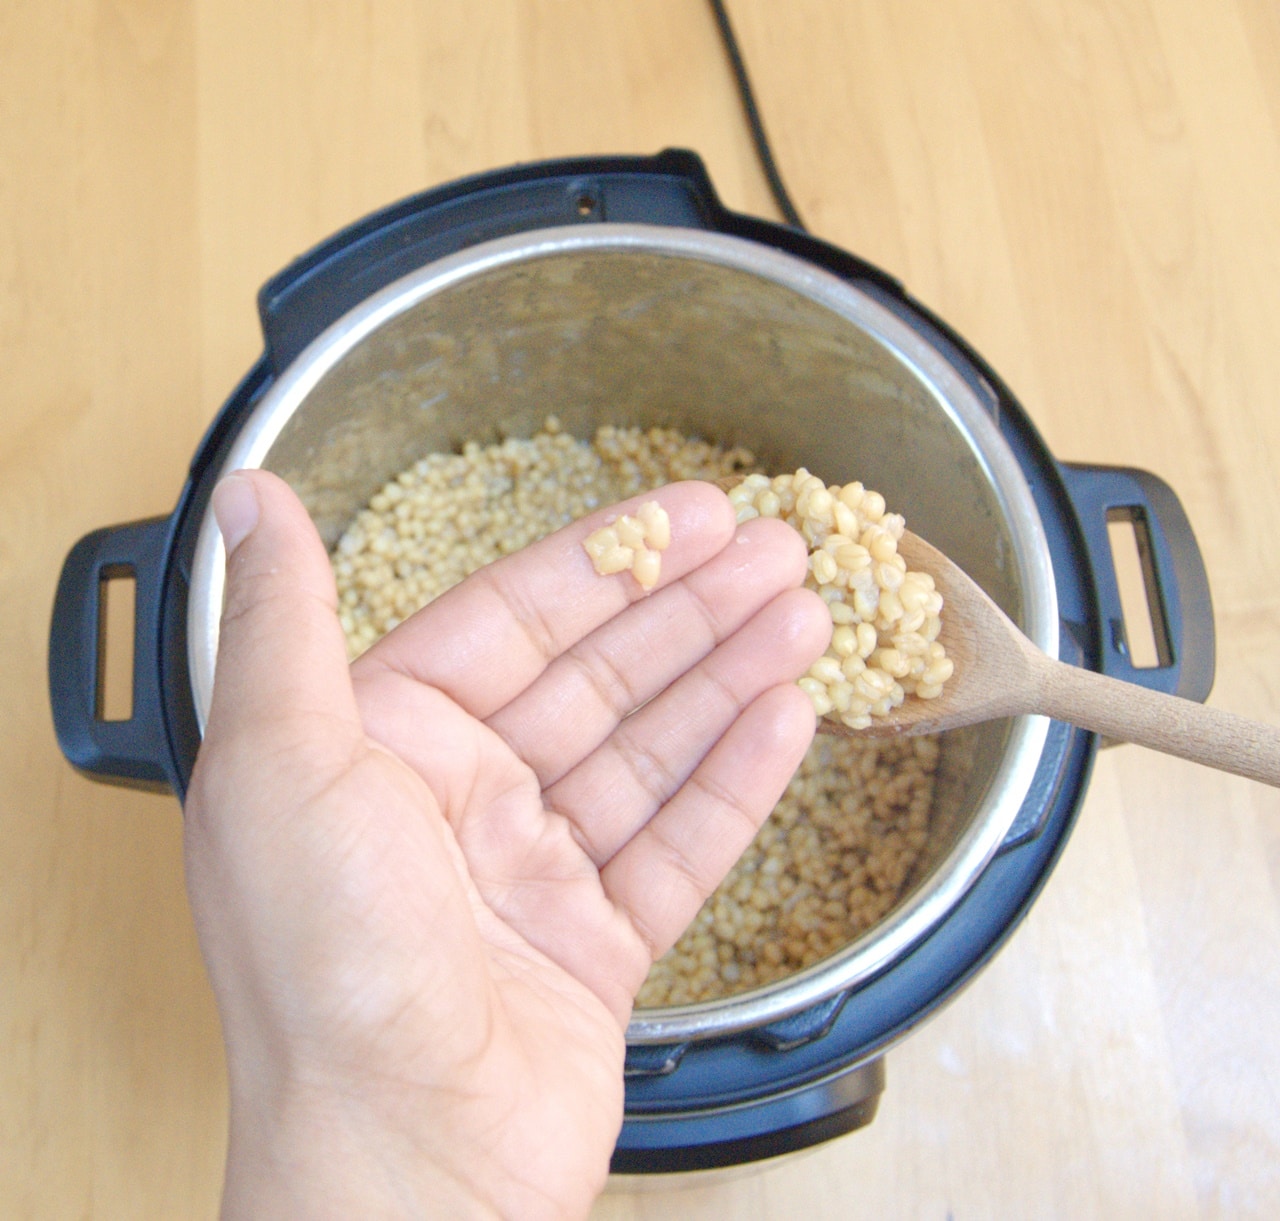 split wheat berries in a hand placed over the instant pot.